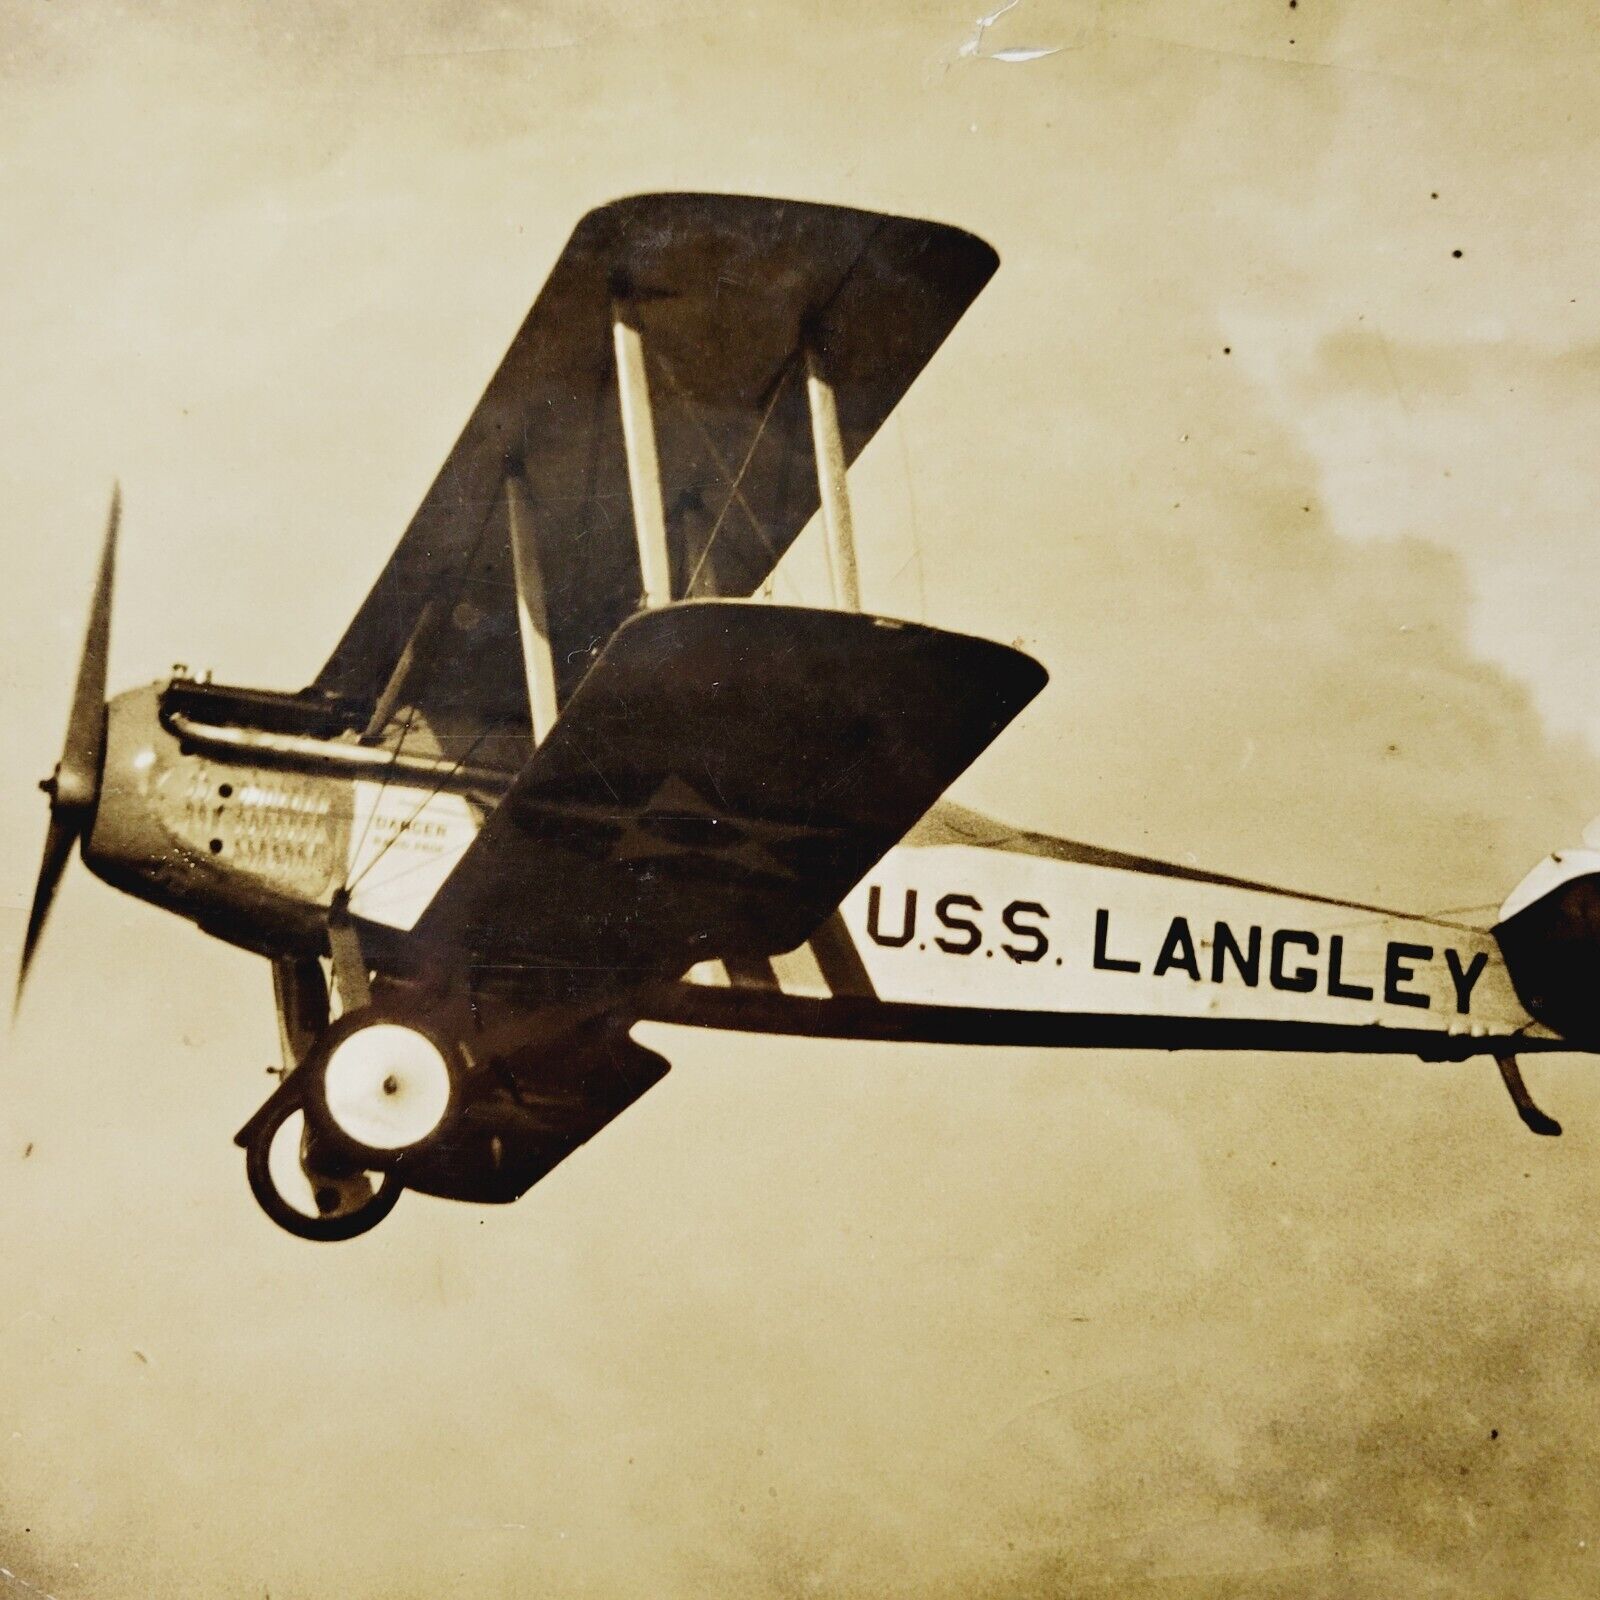 1926 Photo - Plane from USS Langley CV-1 - First Aircraft Carrier in US Navy